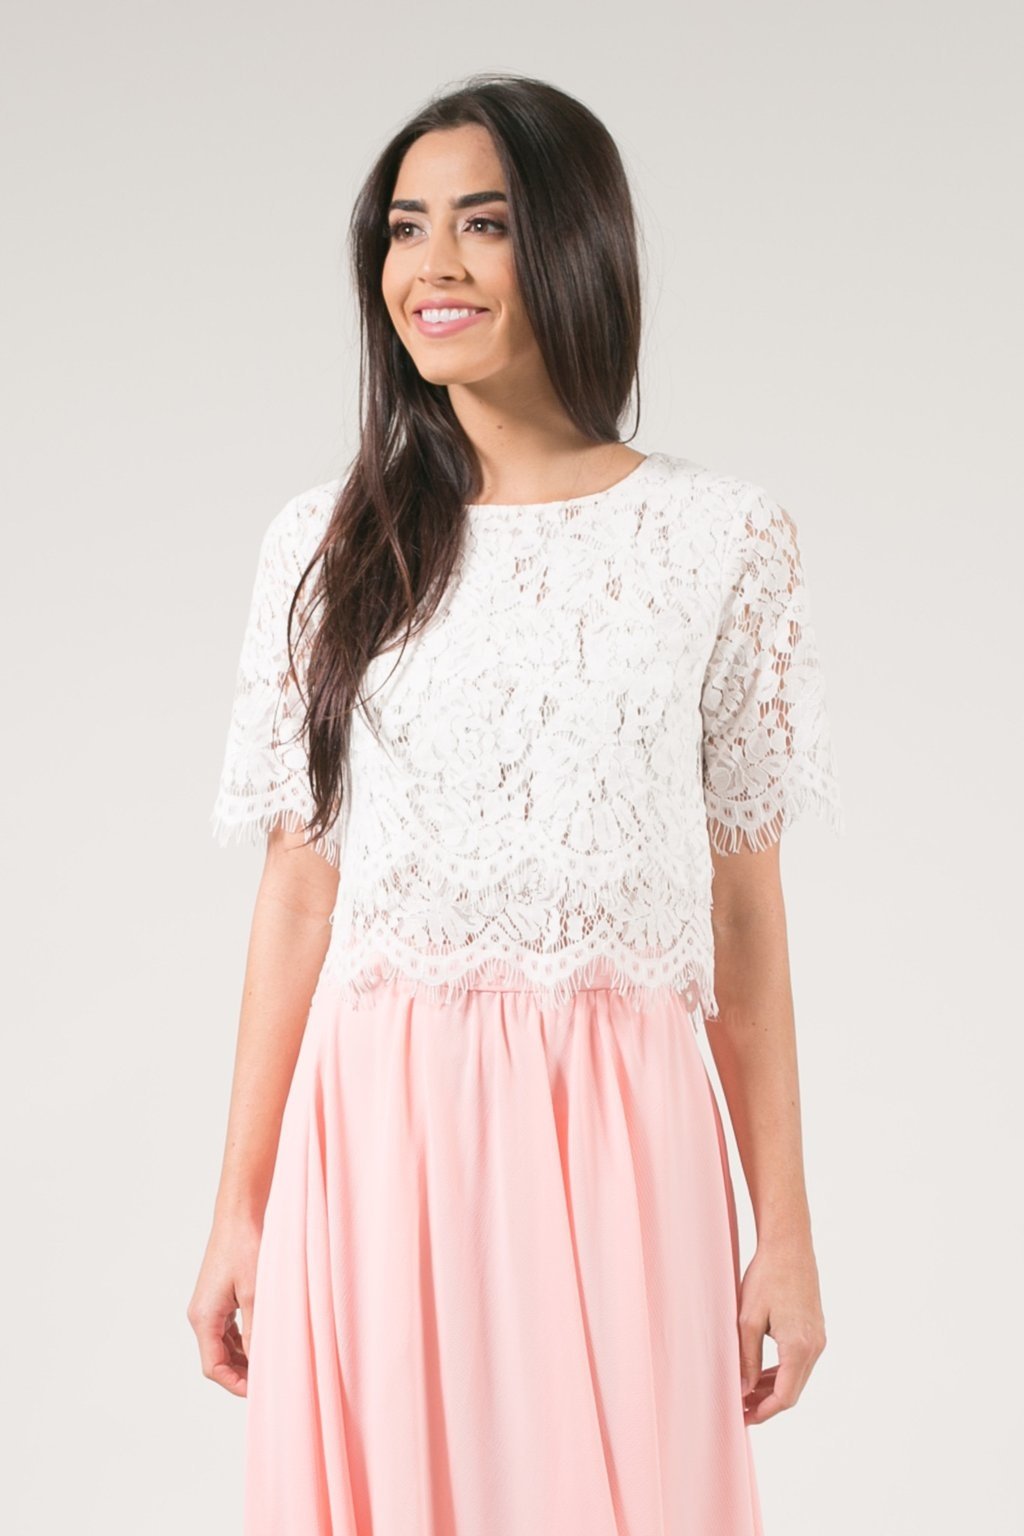 White Lace Long Sleeve Top, Buy Sensational Luxe Top